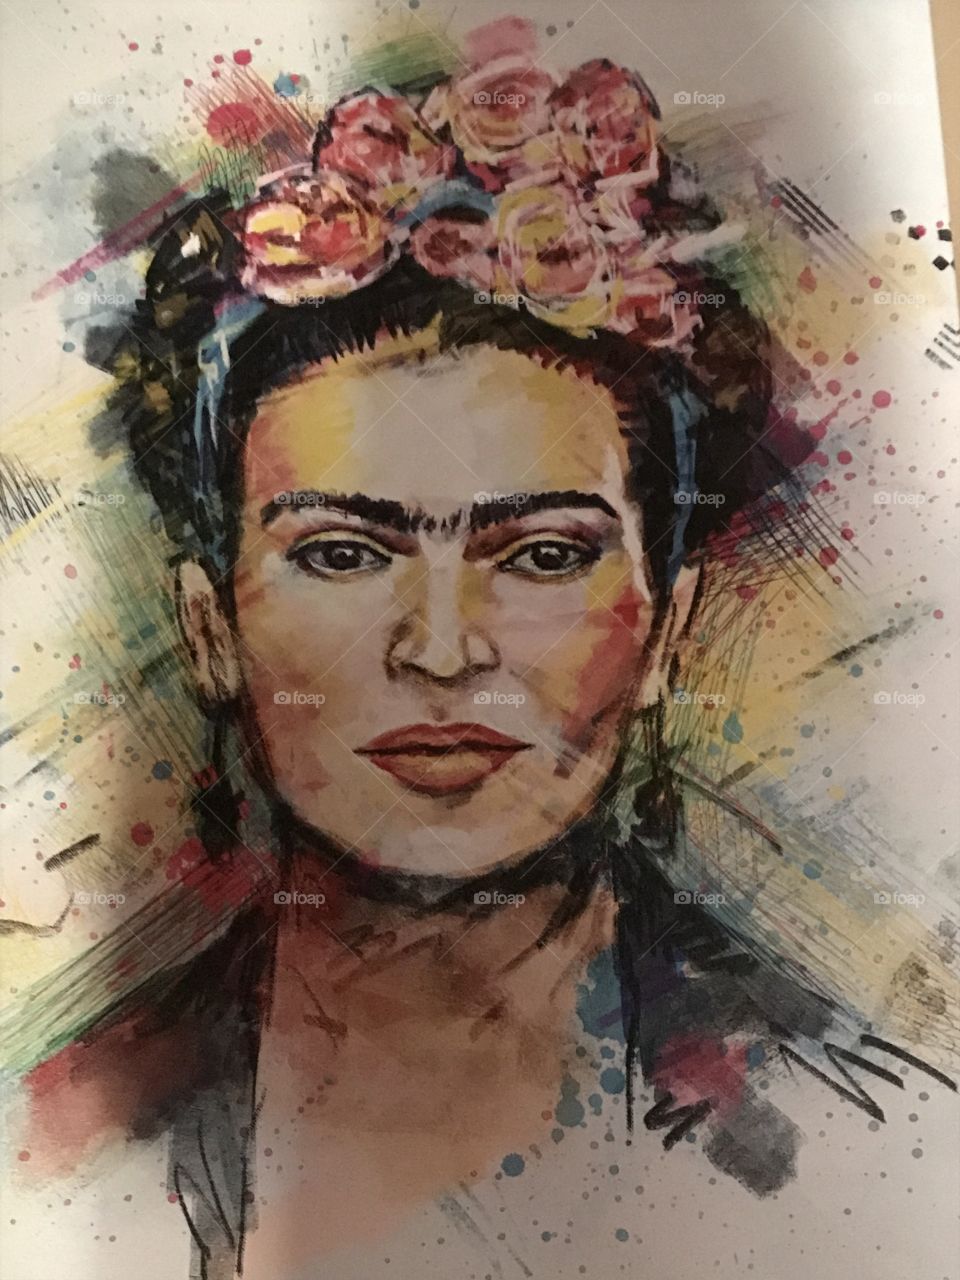 Love my new canvas! Frida is one of my favorite artists.